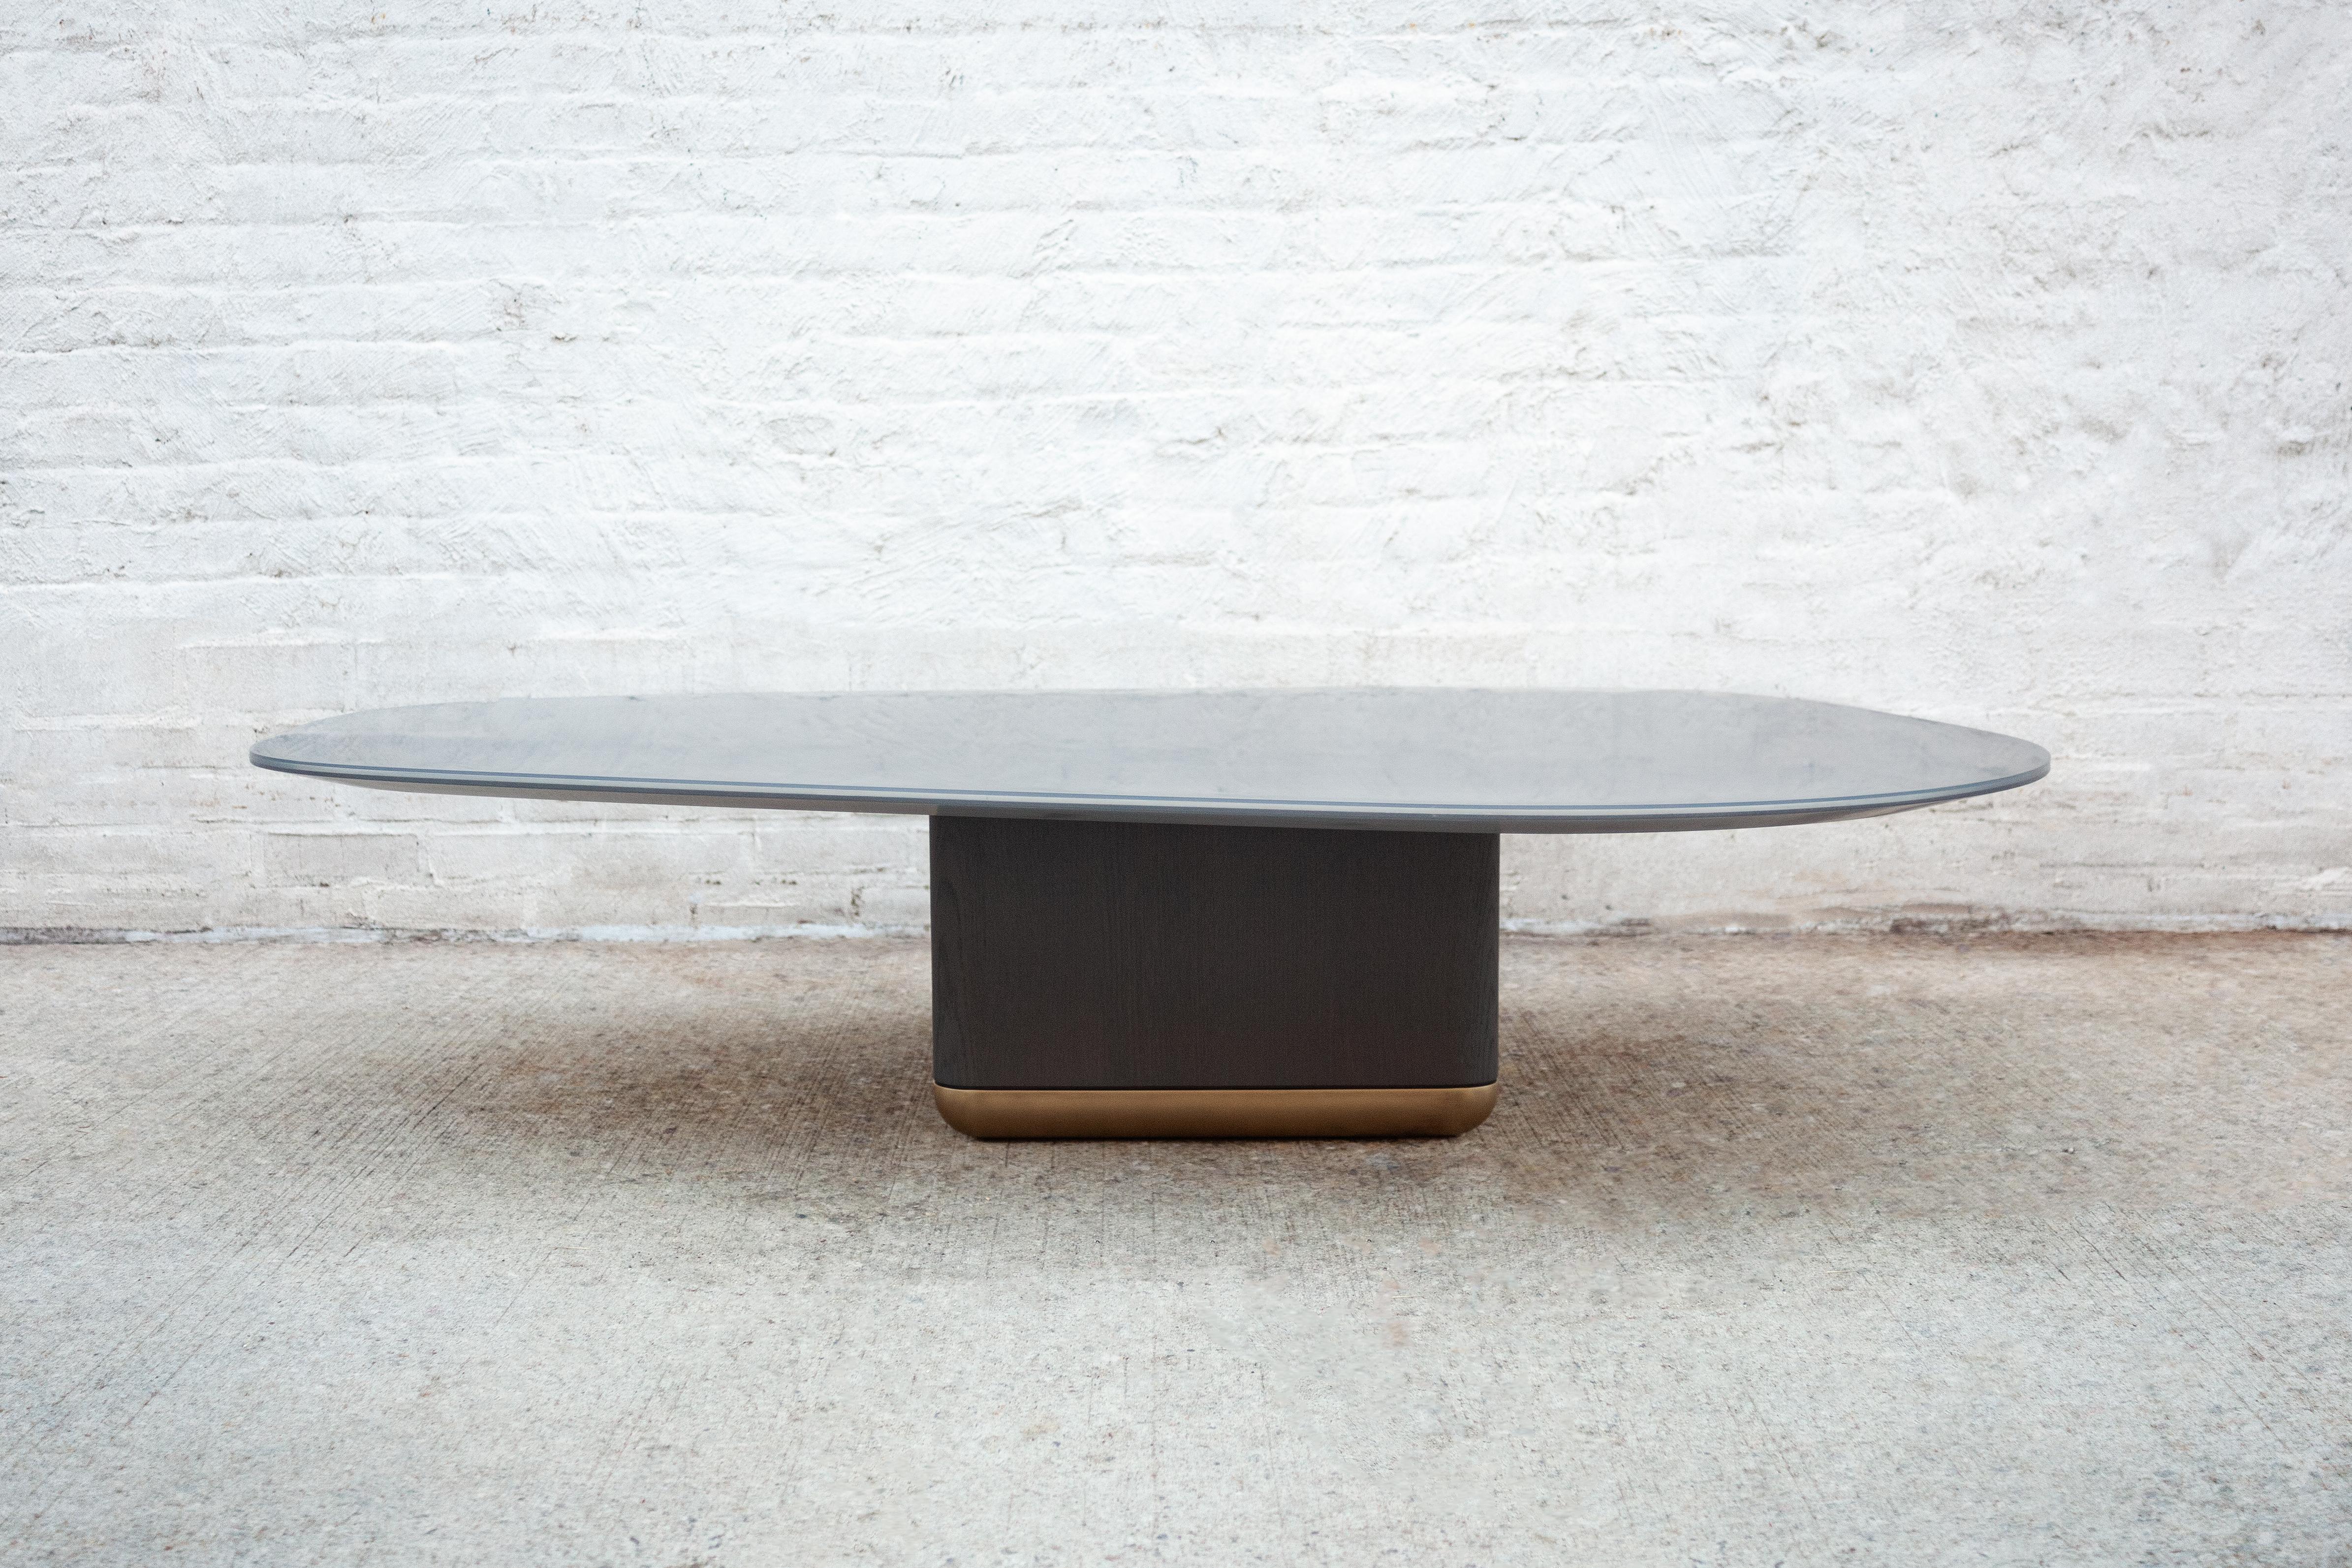 The sleek and striking curved jasper coffee table features a black oak and bronze base, and an irregular shaped tabletop featuring aluminum encased in resin. 

Dimensions as shown: L 60 in. / W 42 in. / H 14 in. 

Lead Time: 16-18 weeks 

Other